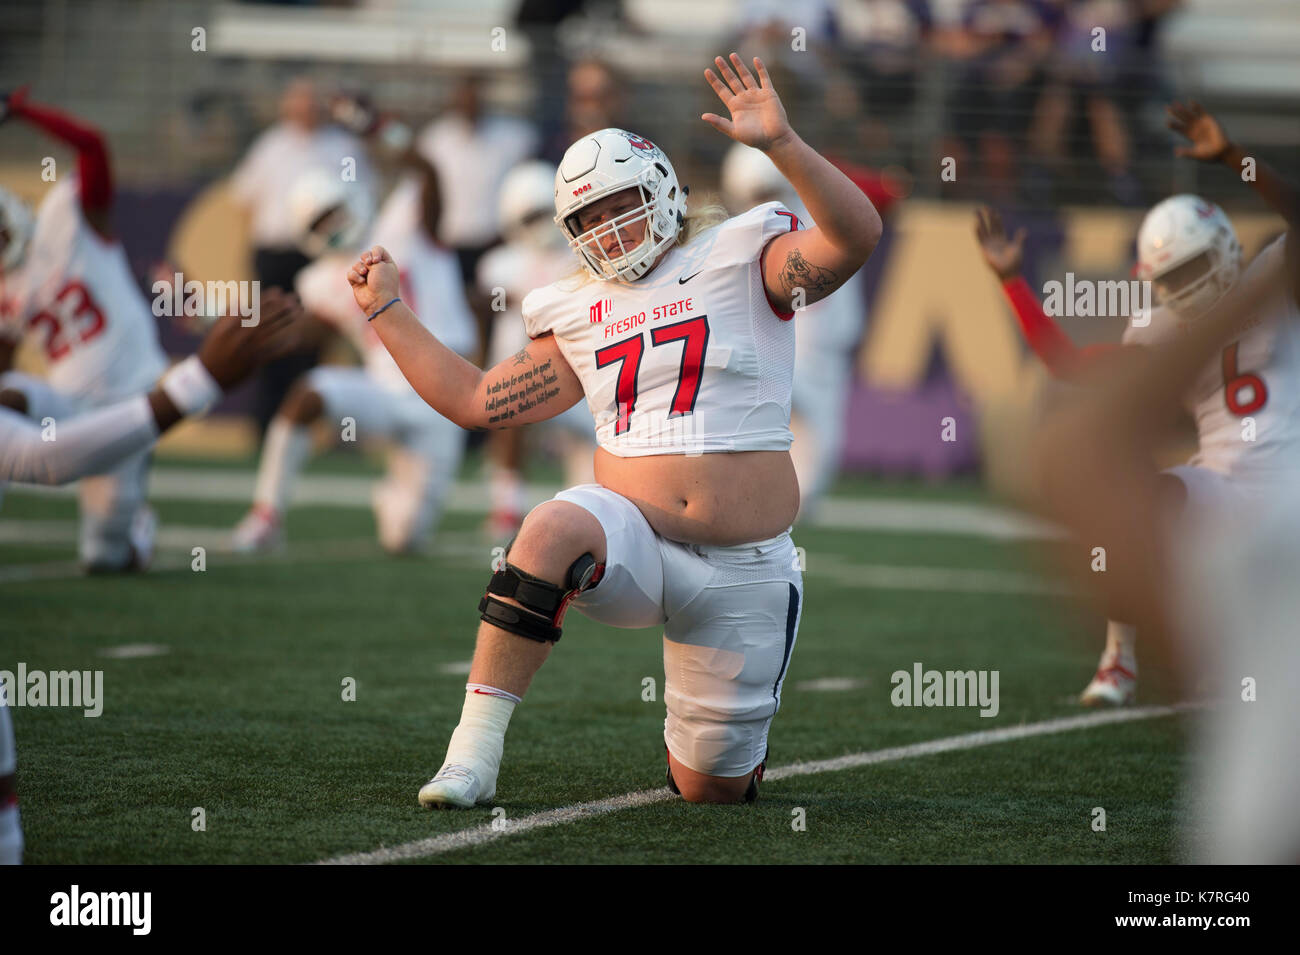 Seattle, WA, USA. 16th Sep, 2017. Fresno lineman Aaron Mitchell (77) stretches before a NCAA football game between the Fresno State Bulldogs and the Washington Huskies. The game was played at Husky Stadium in Seattle, WA. Jeff Halstead/CSM/Alamy Live News Stock Photo